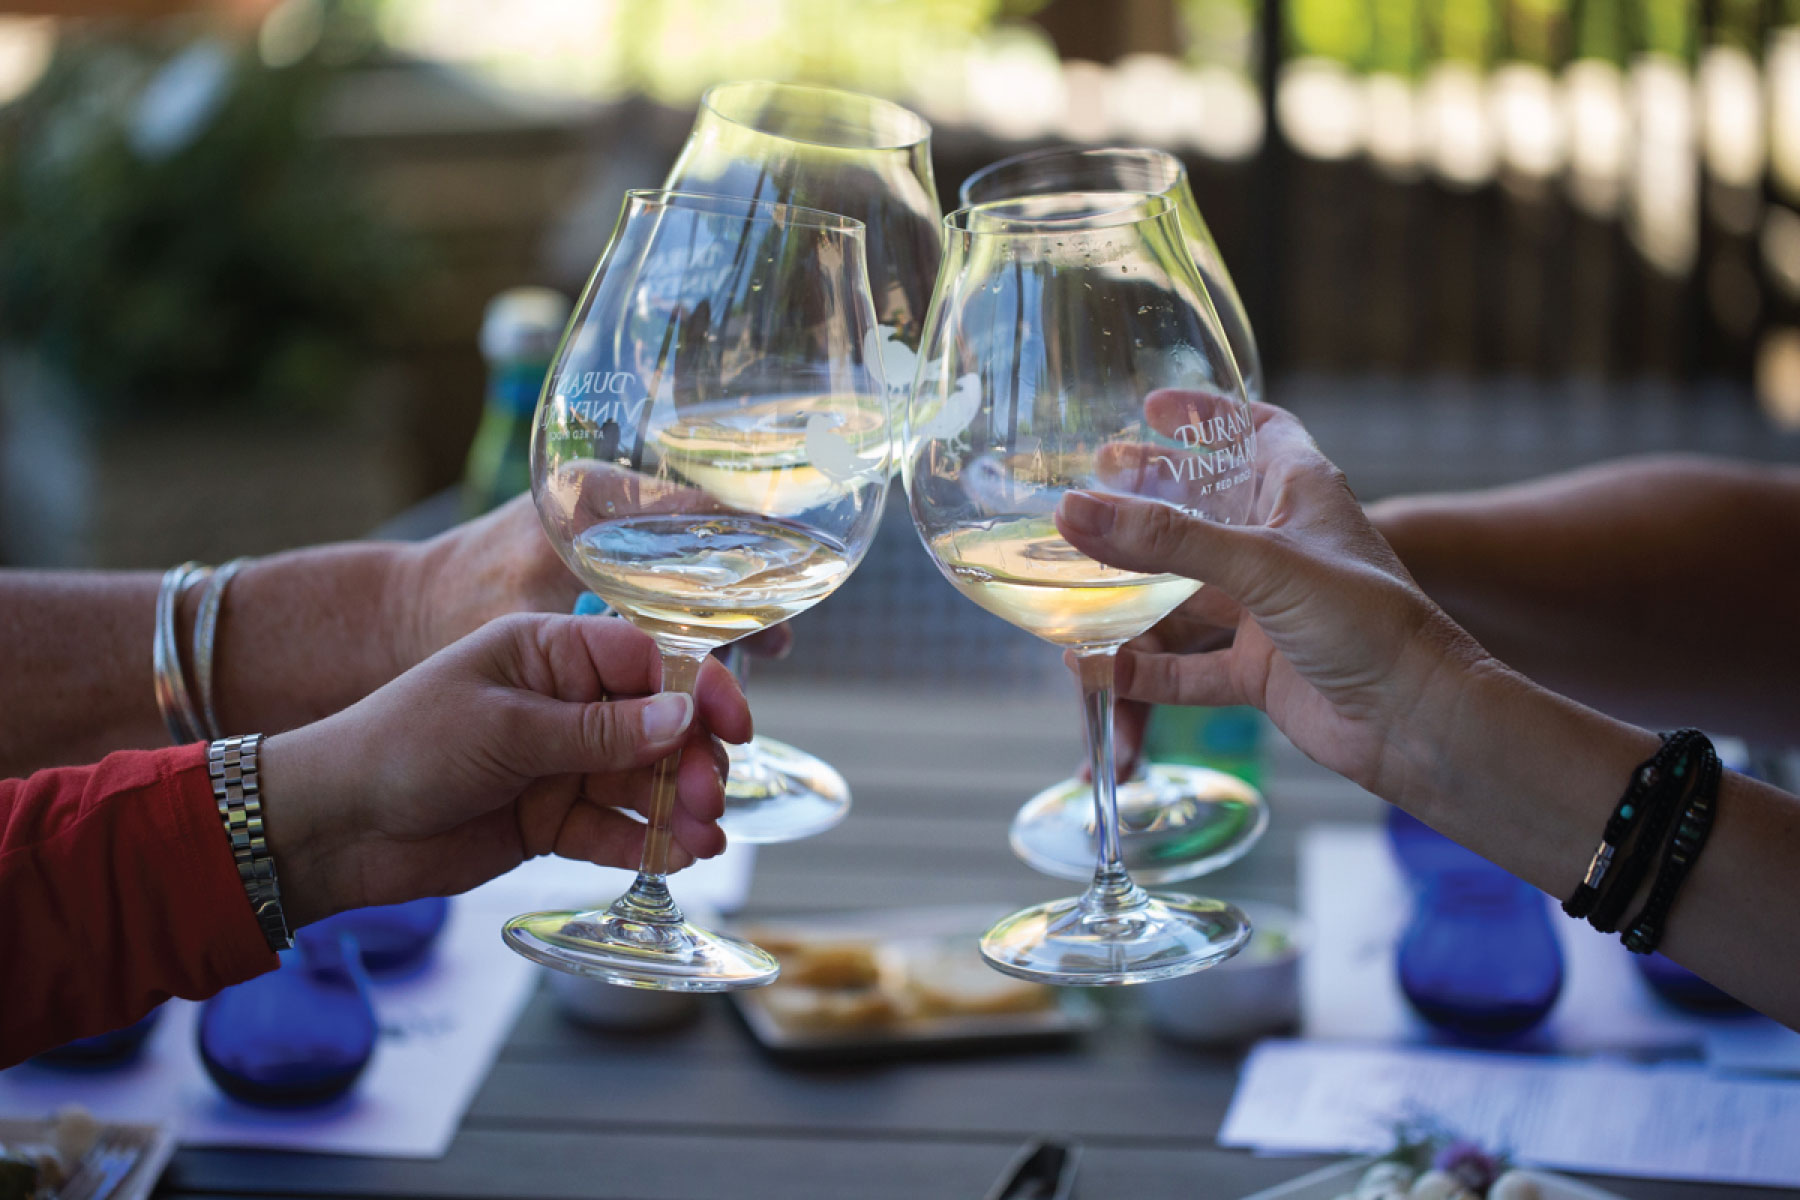 Cheers with wine glasses